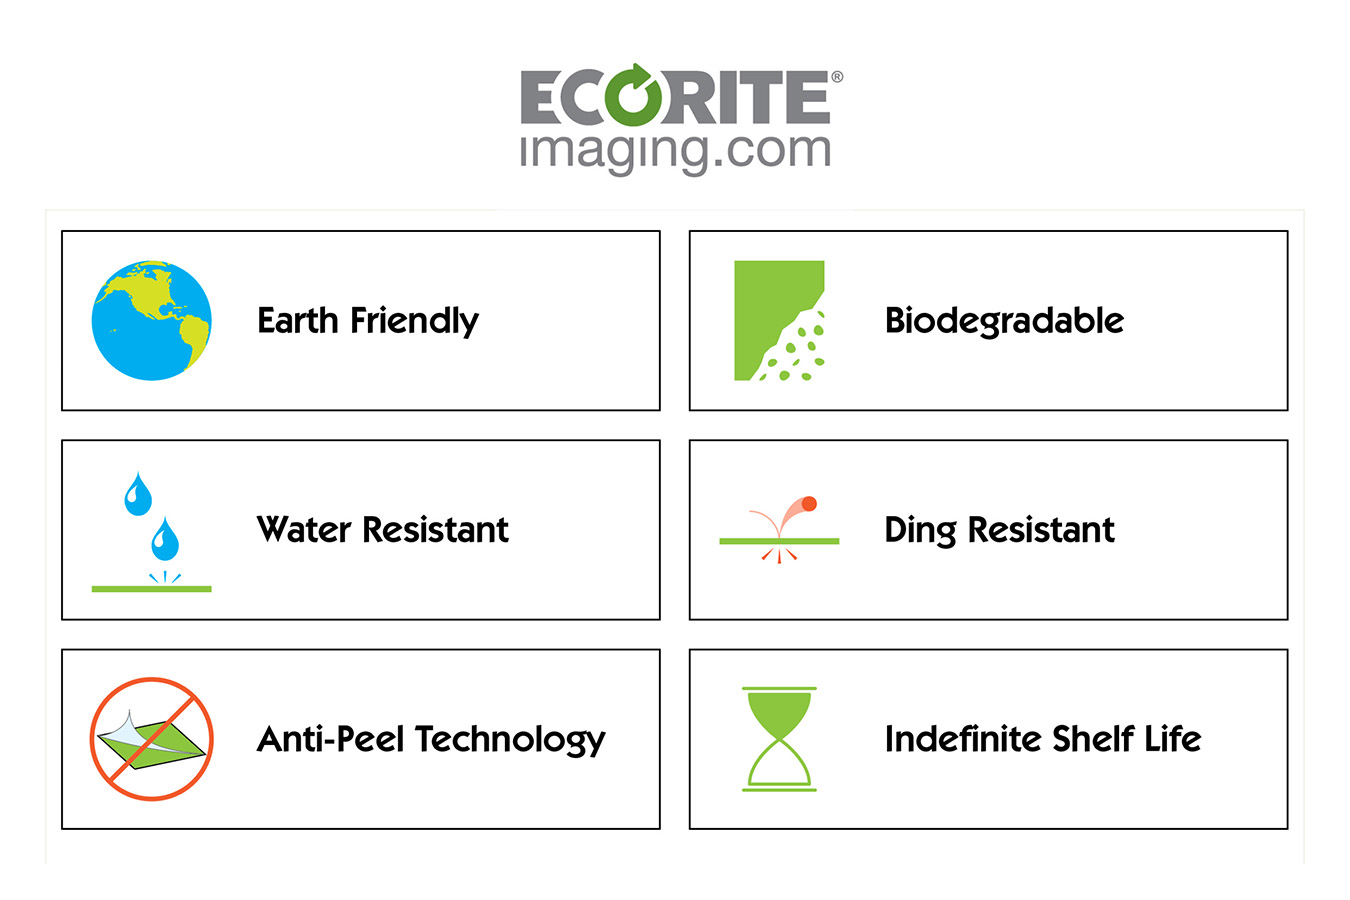 ecorite 10 : Attributes of biodegradable and recycle materials used in Ecorite Imaging products